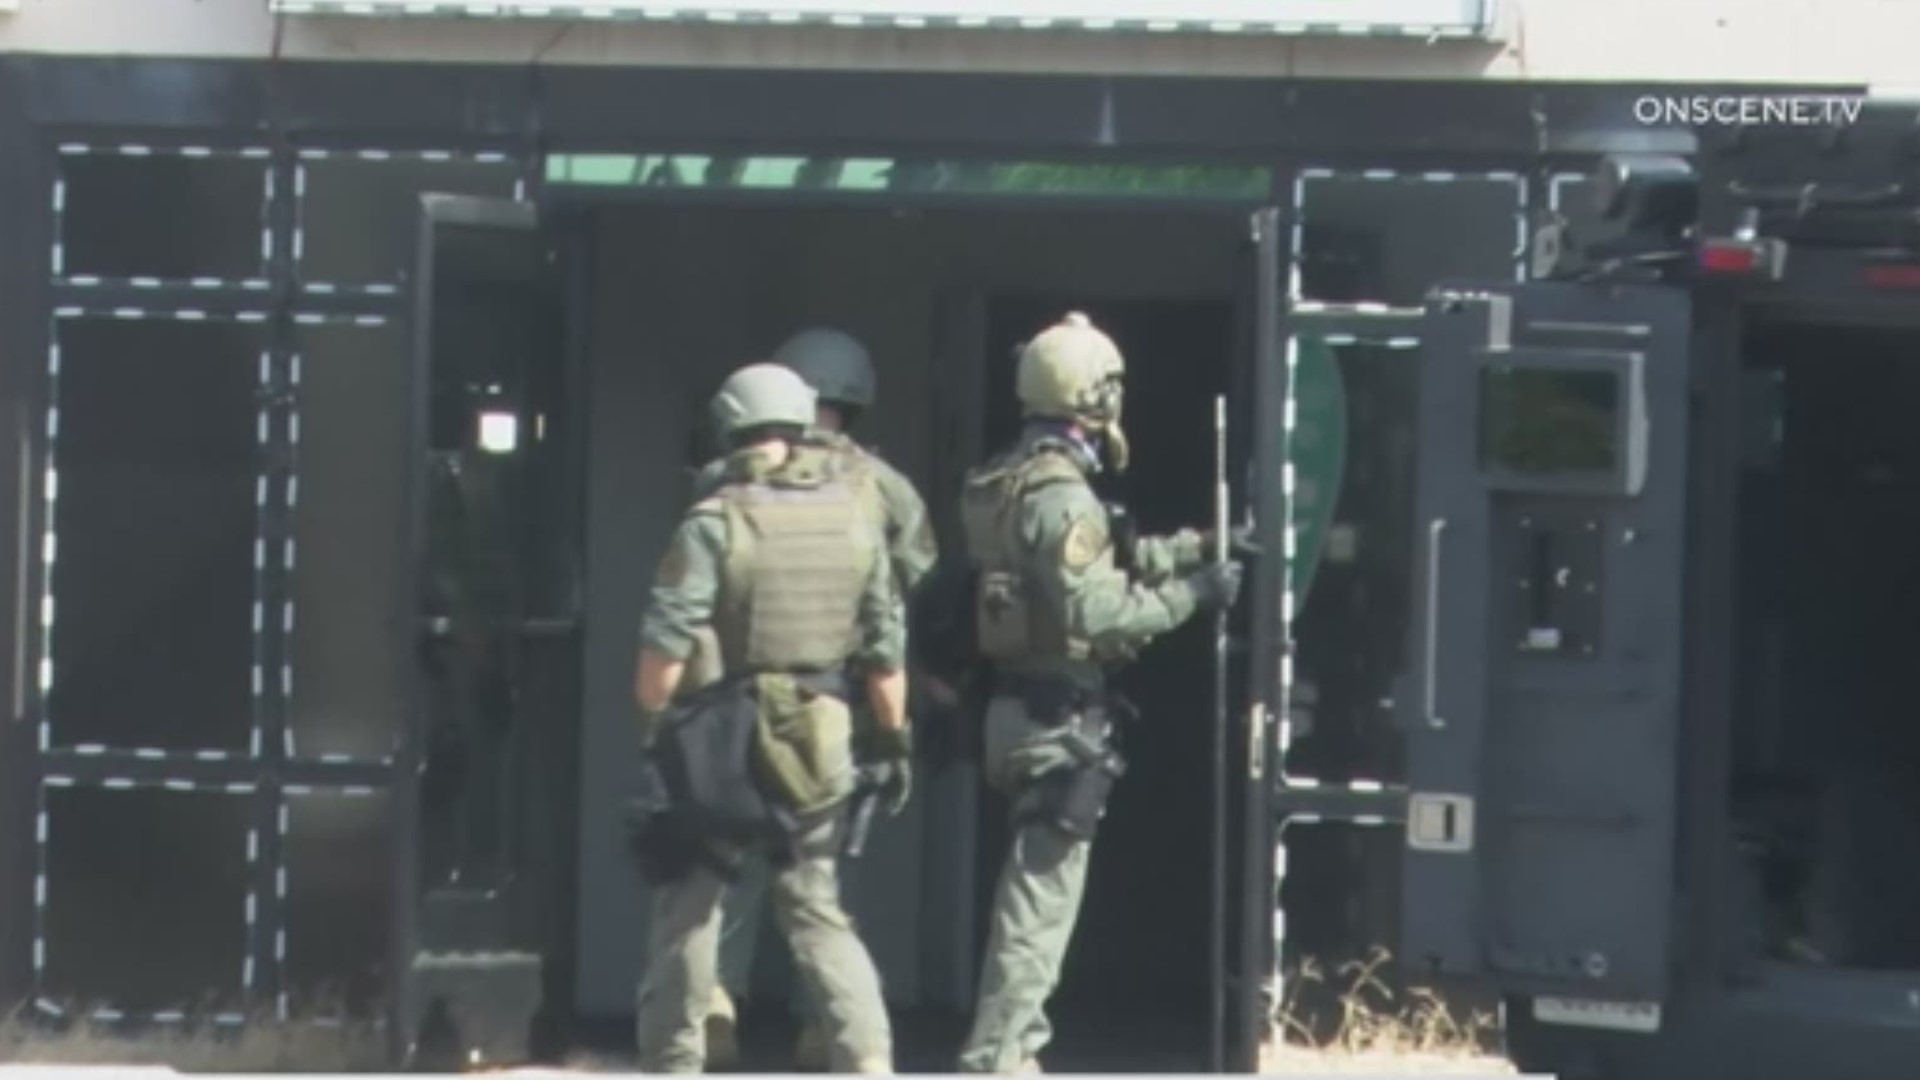 The Chula Vista SWAT team was called to the illegal marijuana dispensary after officers say those inside initially refused to come out.